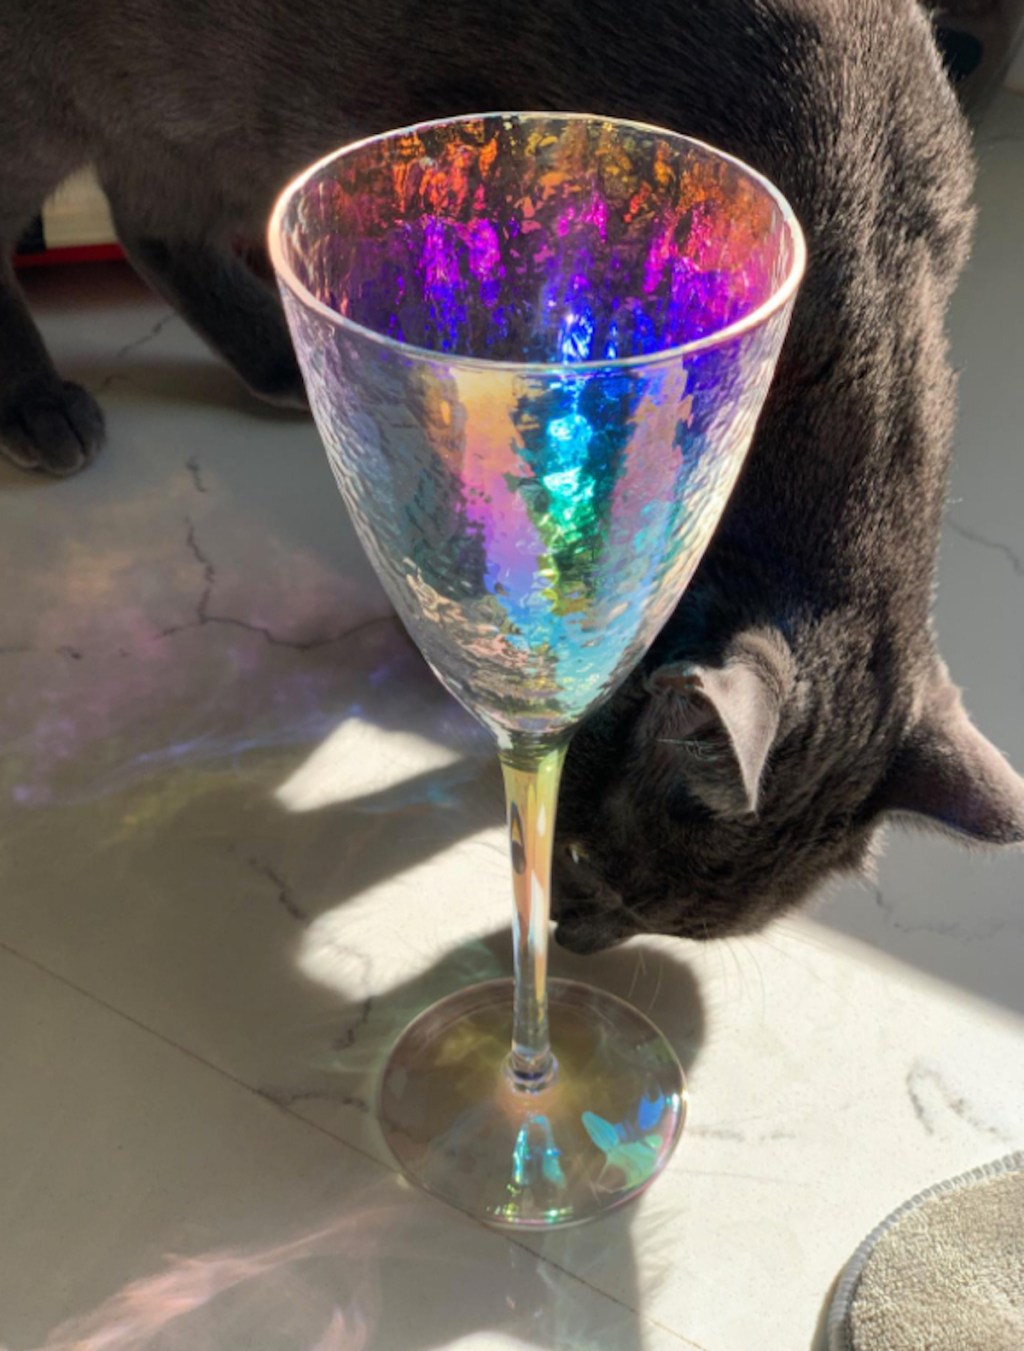 cat sniffing iridescent wine glass on countertop